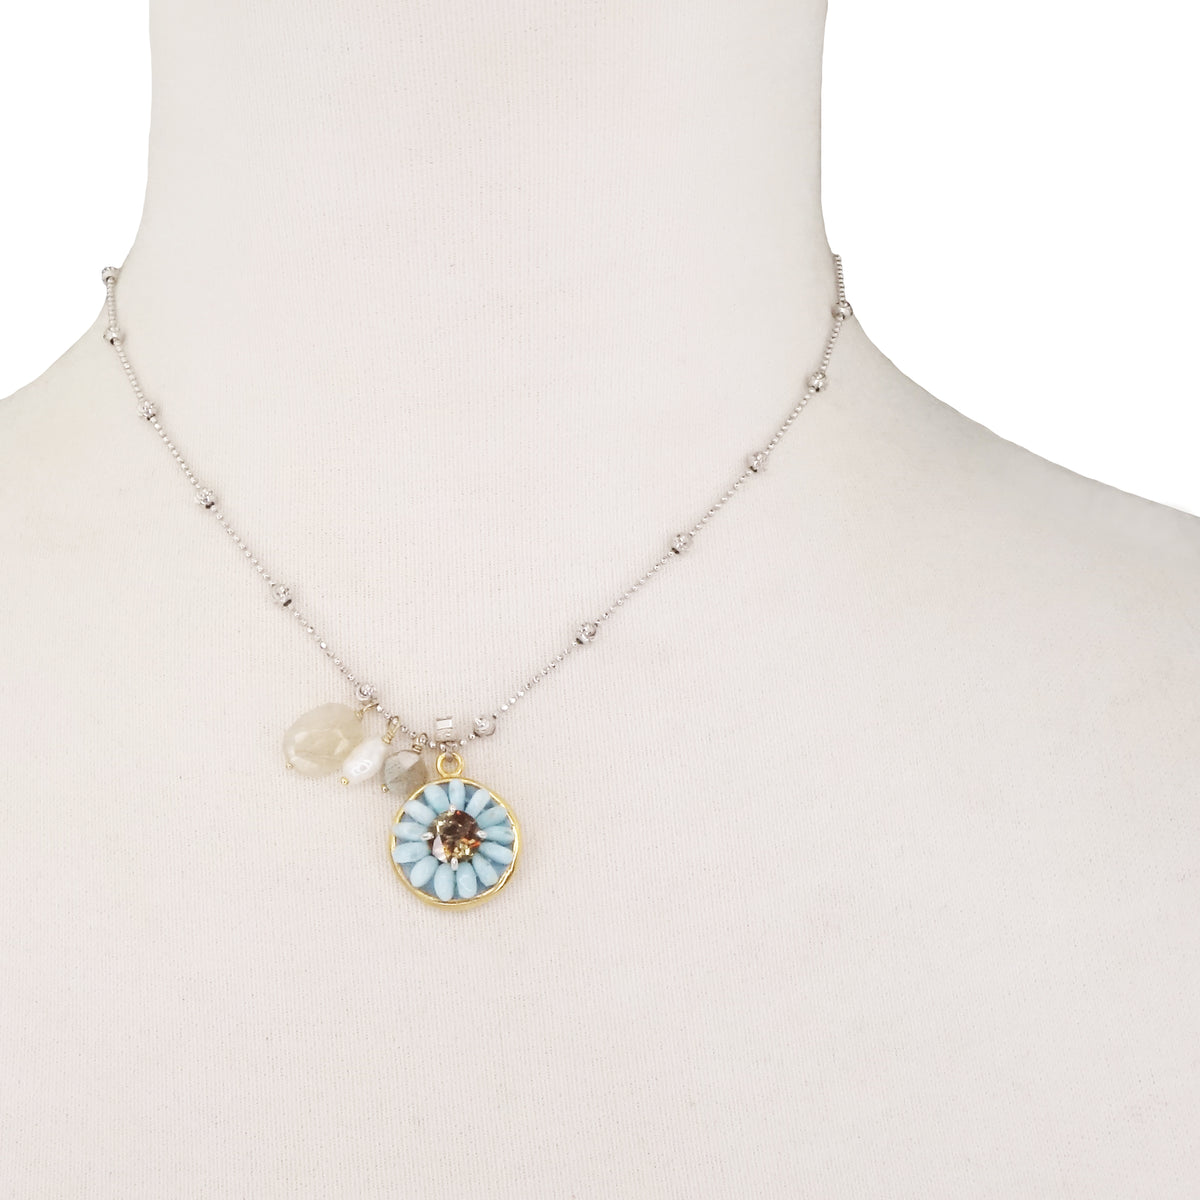 Mermaids Aren't the Only Ones Who Splash: larimar + andasulite mosaic necklace